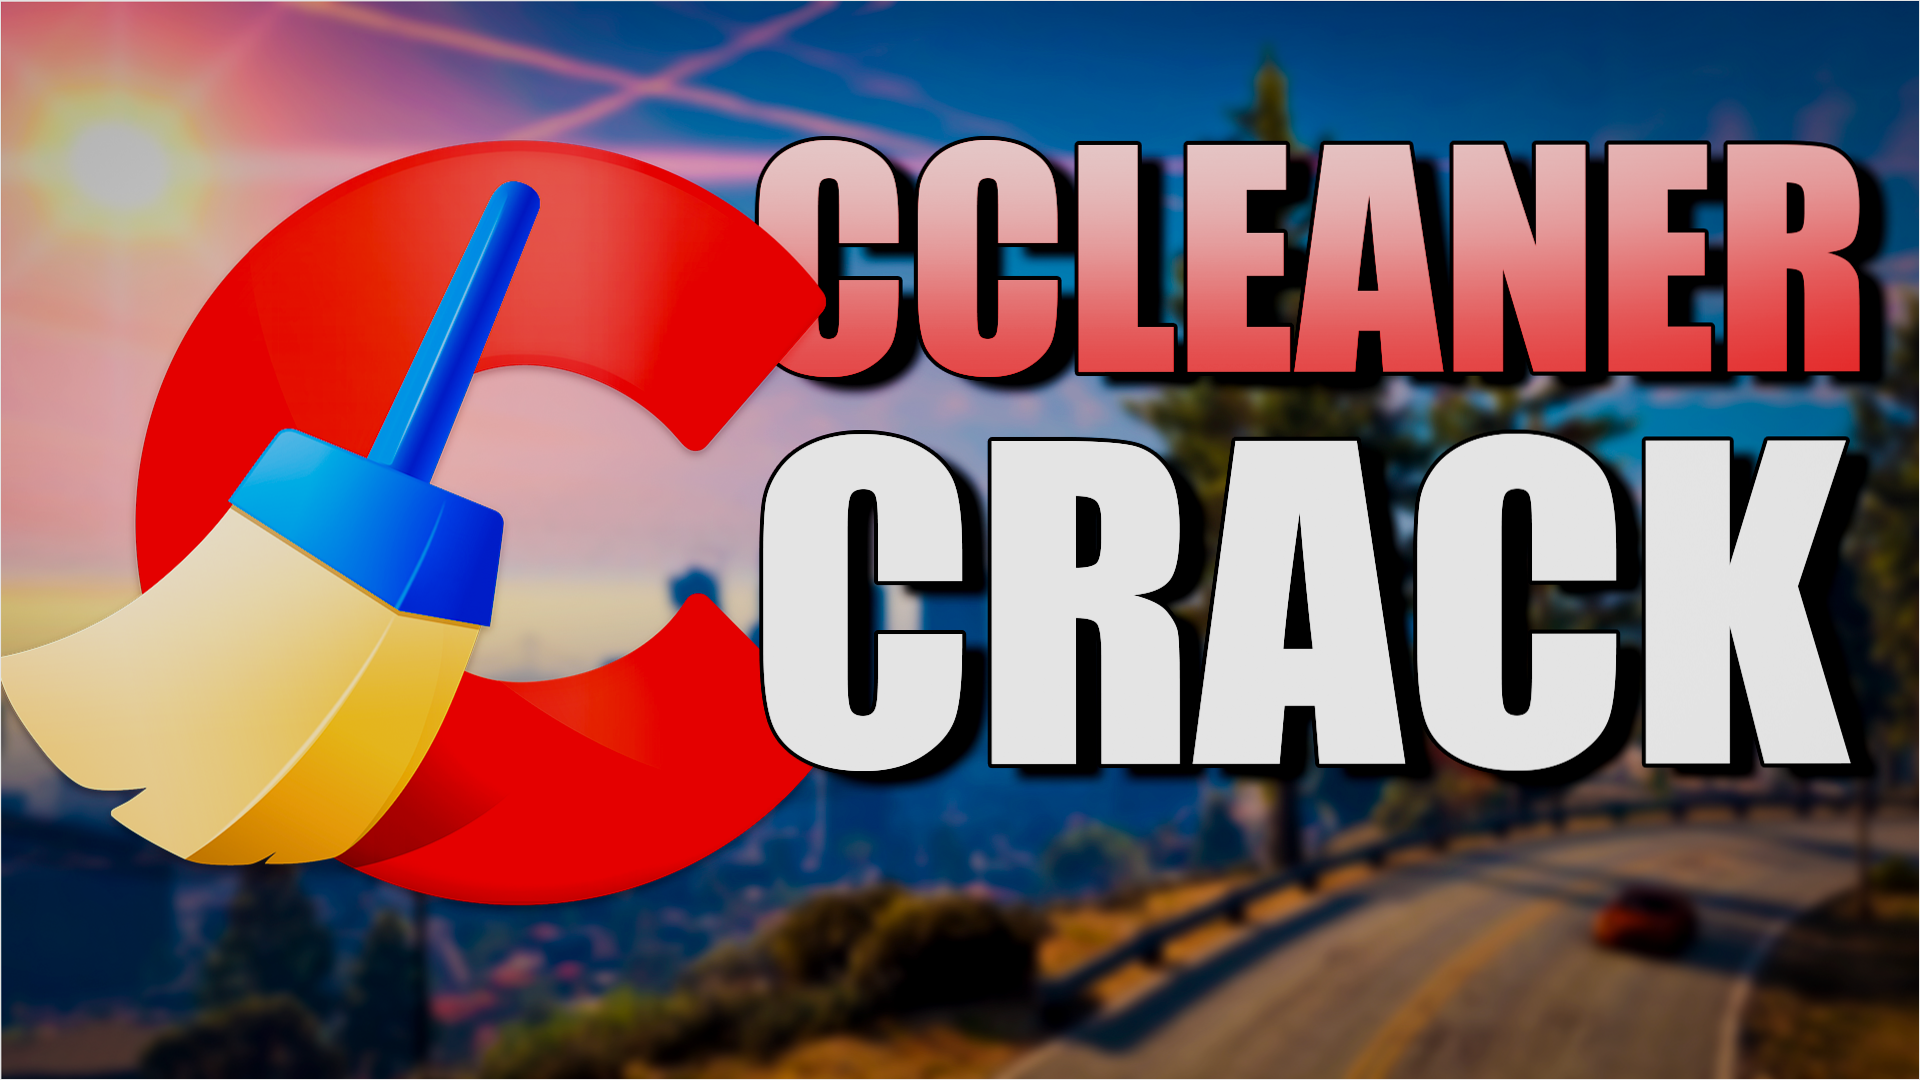 ccleaner pro review 2022